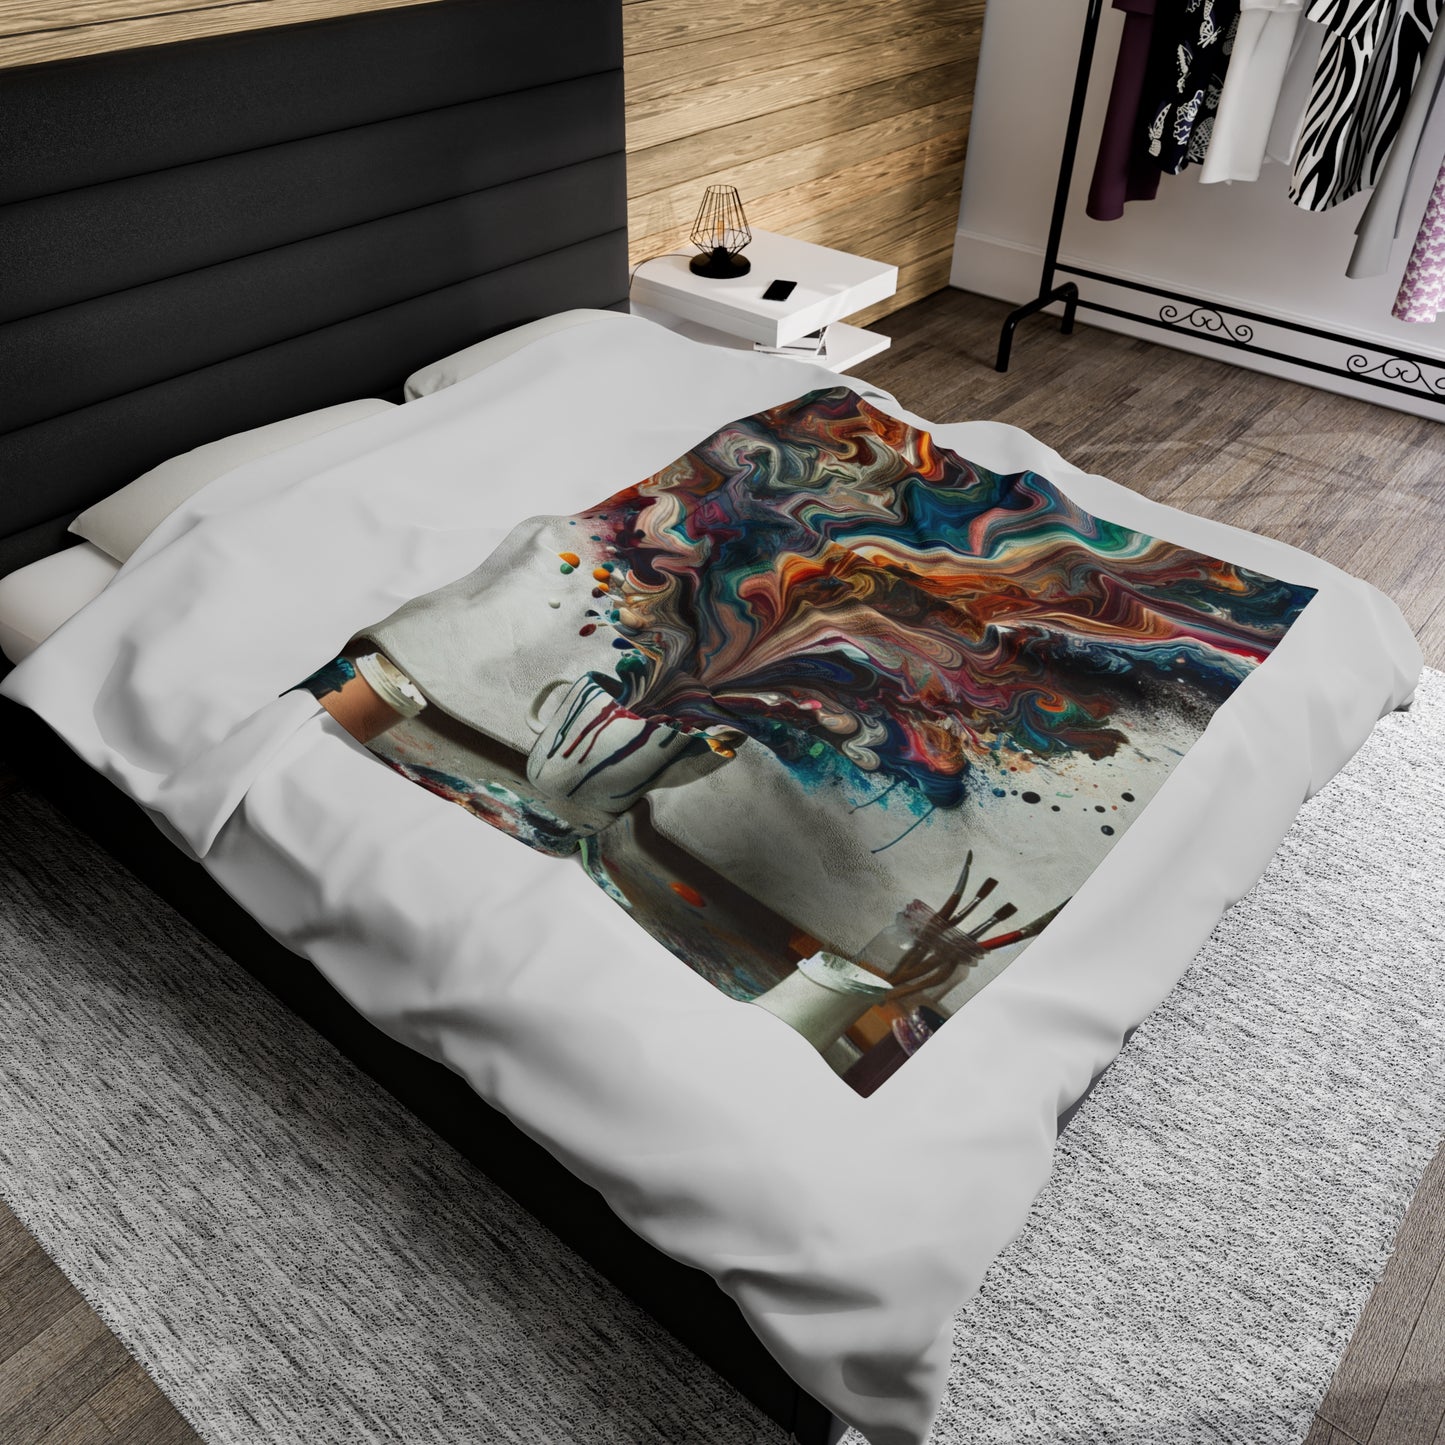 "A Paint Poured Paradise: Acrylic Pouring Art" - The Alien Velveteen Plush Blanket Acrylic Pouring Style